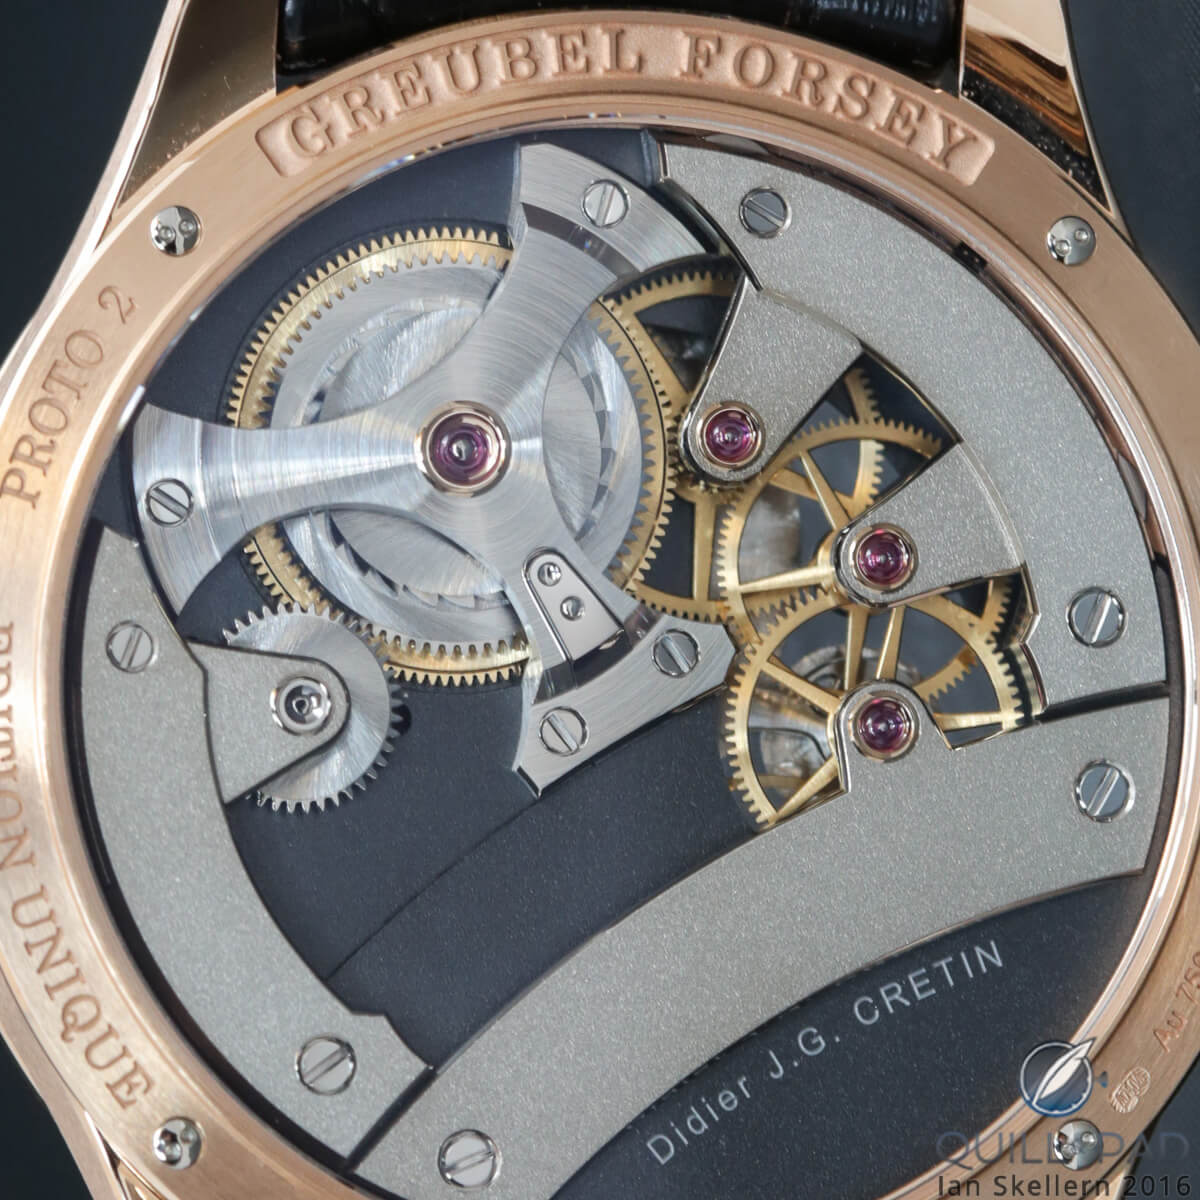 View through the display back of the Greubel Forsey Signature 1 by Didier Cretin